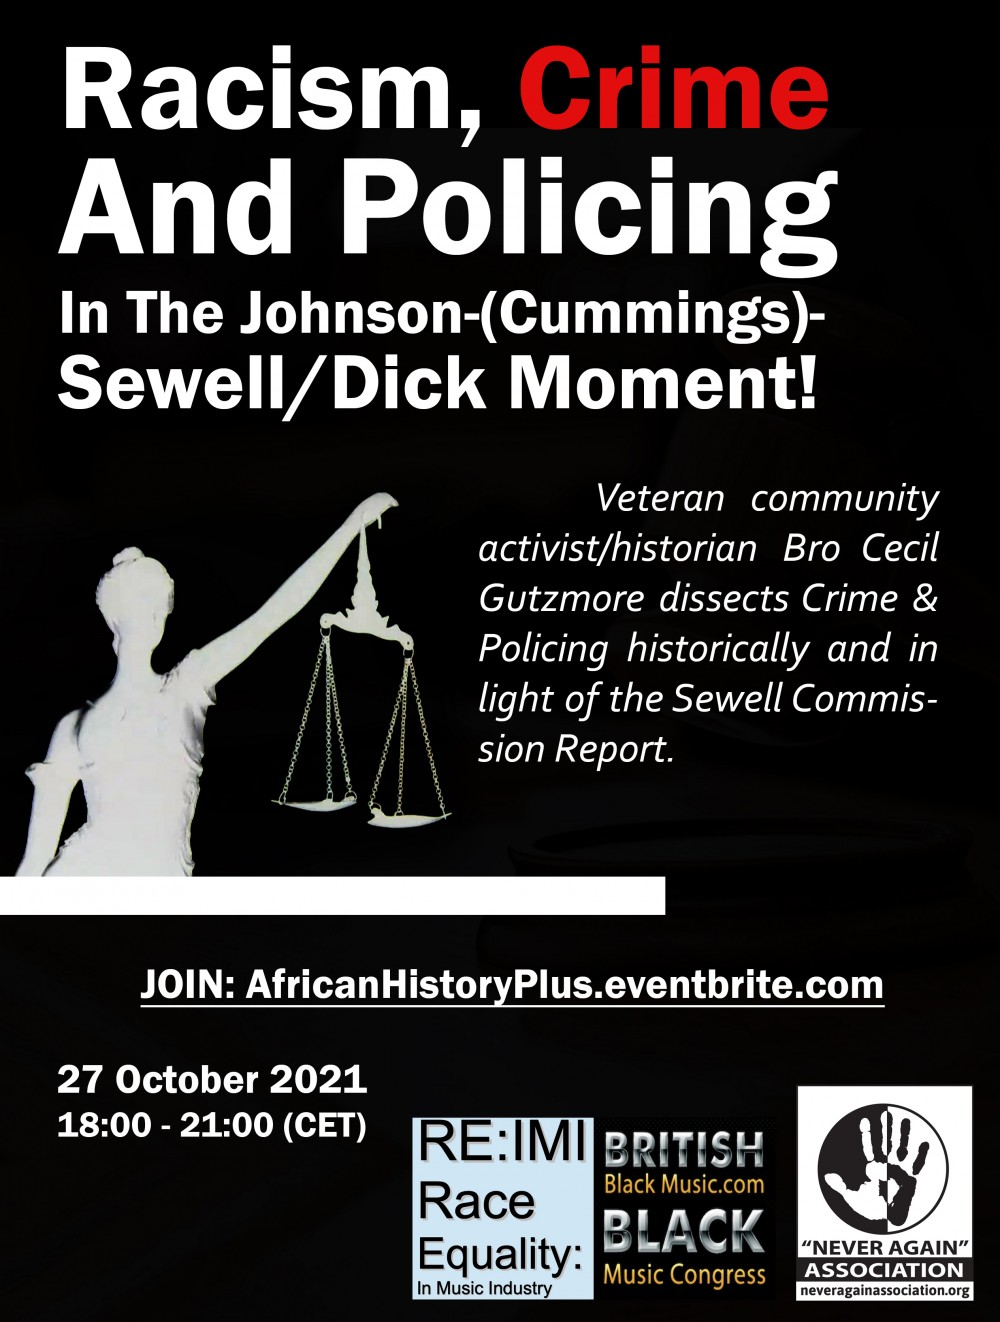 RACISM, CRIME AND POLICING IN THE JOHNSON-(CUMMINGS)-SEWELL/DICK MOMENT